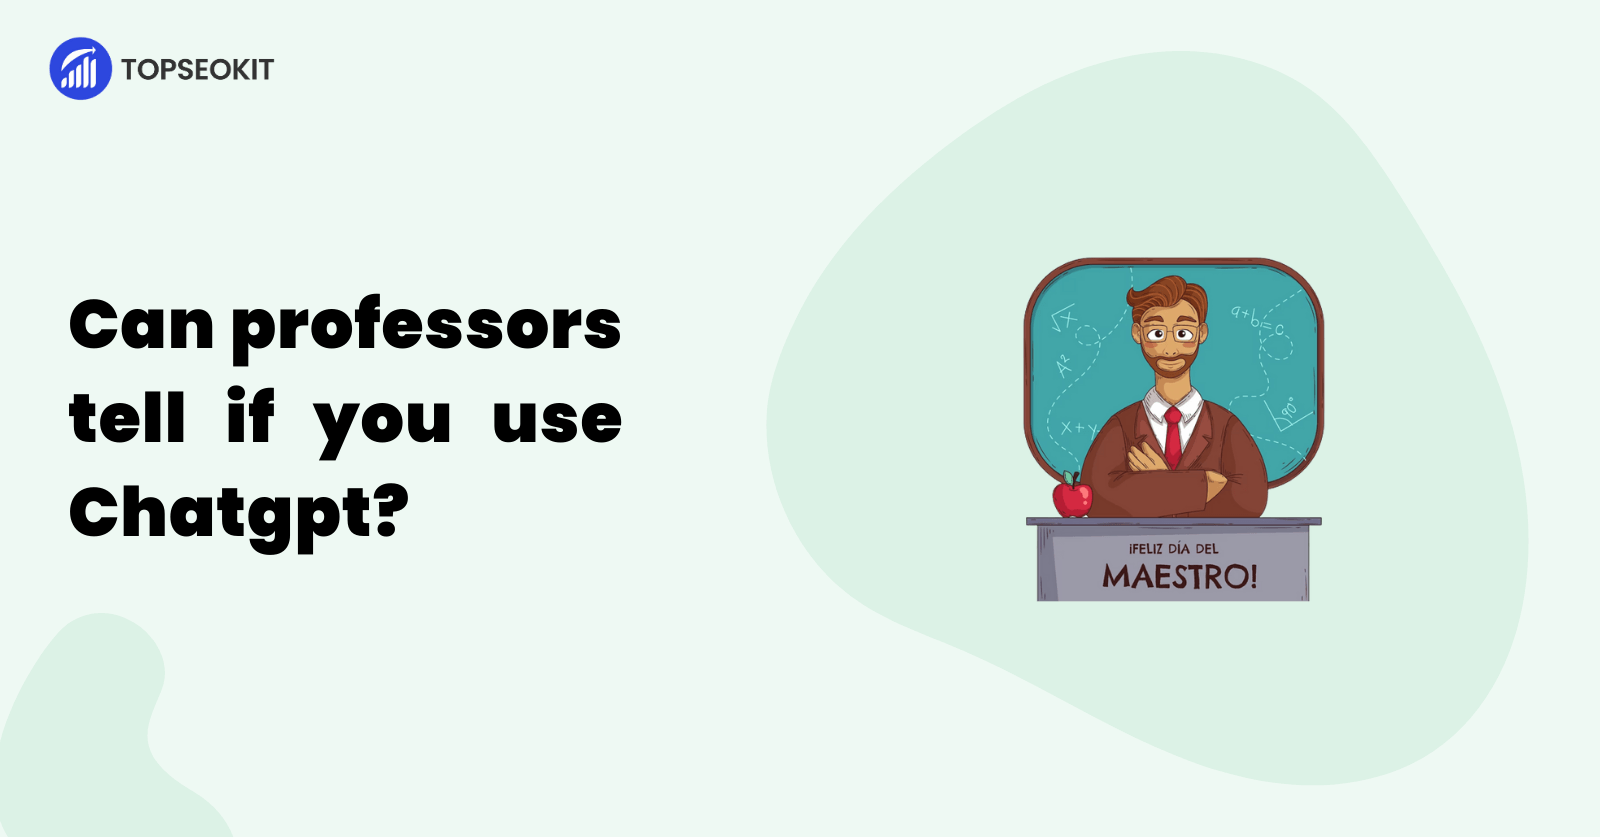 Can professors tell if you use Chatgpt?